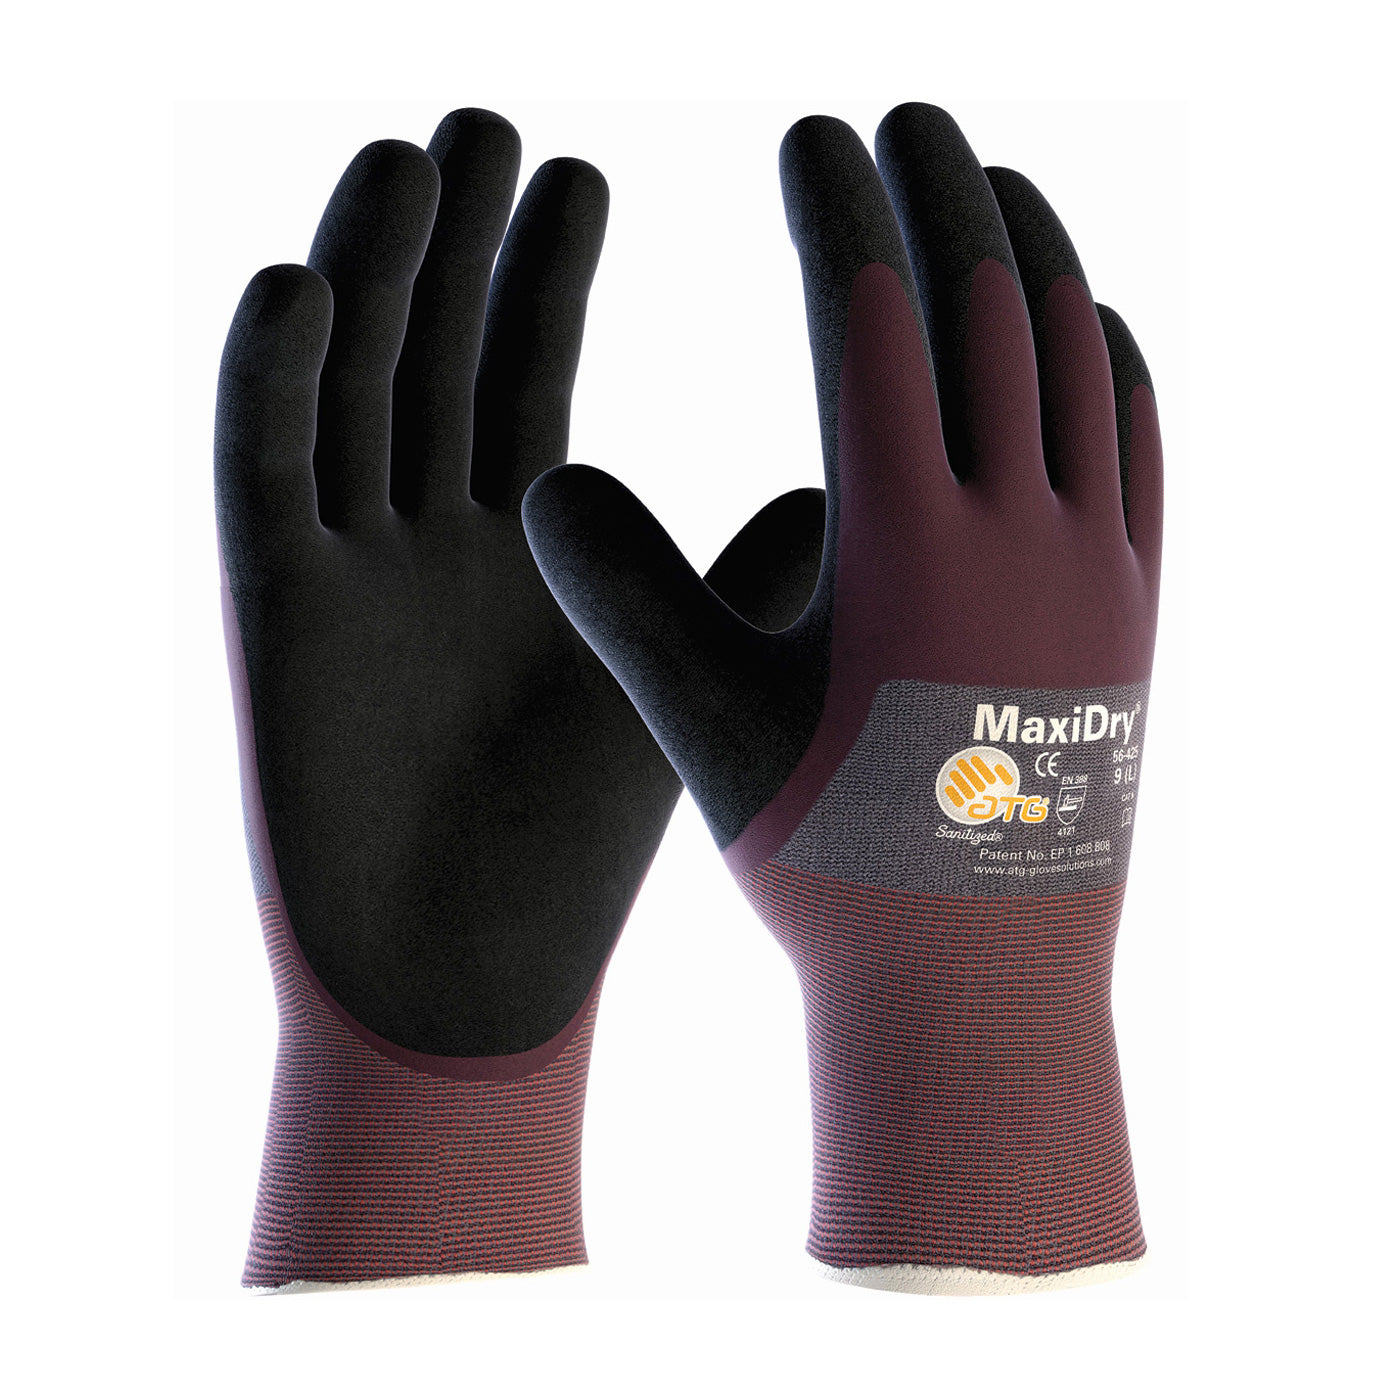 MaxiDry® Ultra Lightweight Nitrile Glove with Palm and Knuckle Coating